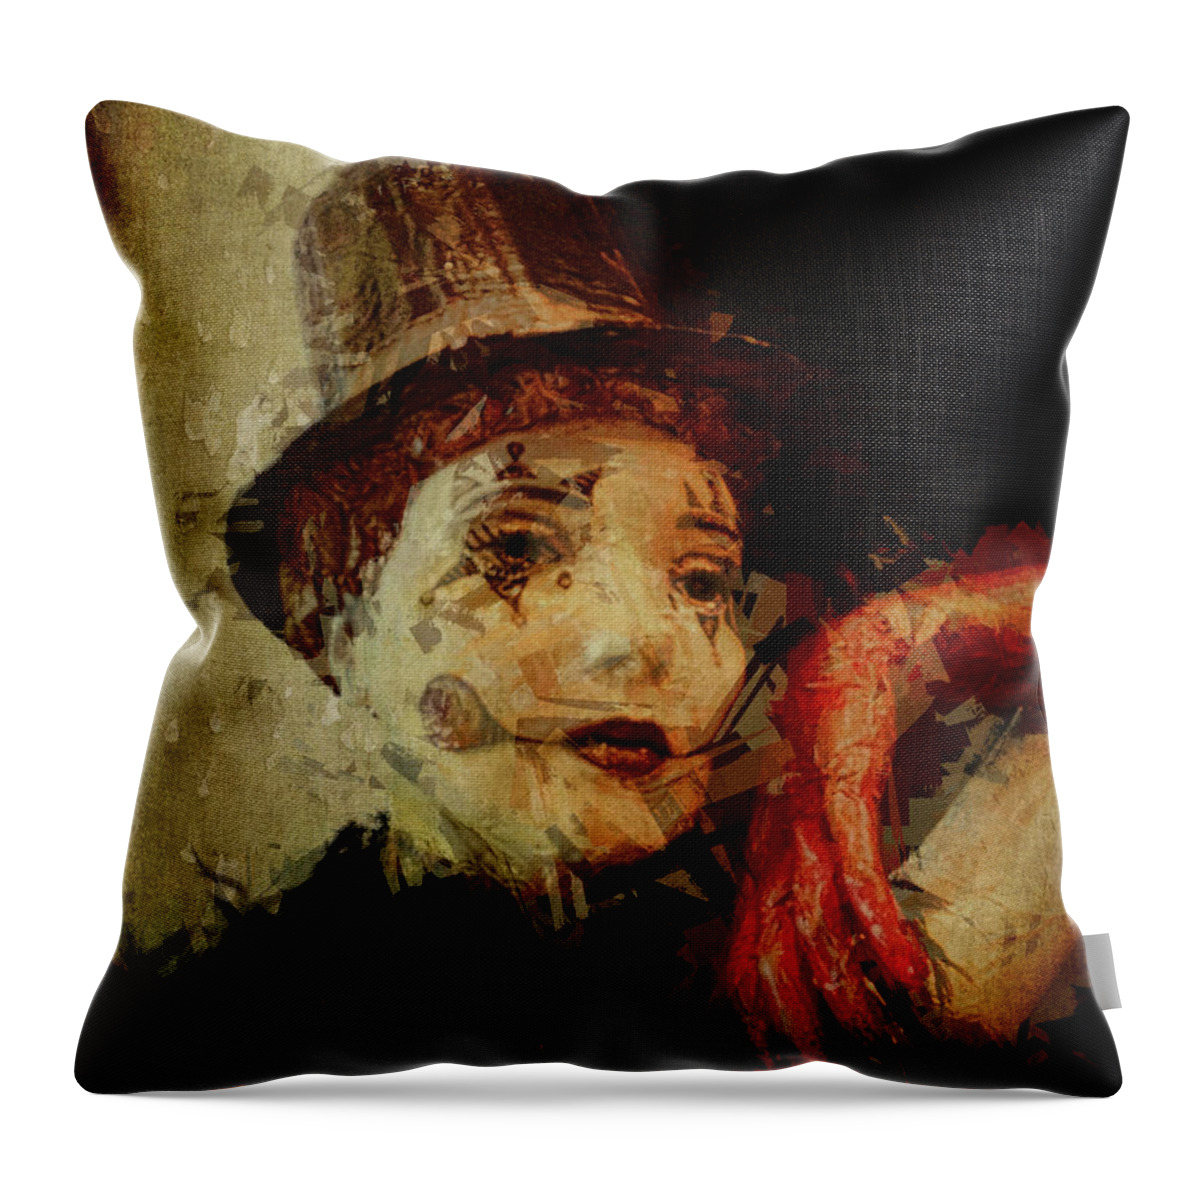 Circus Throw Pillow featuring the photograph Mime by Pete Rems